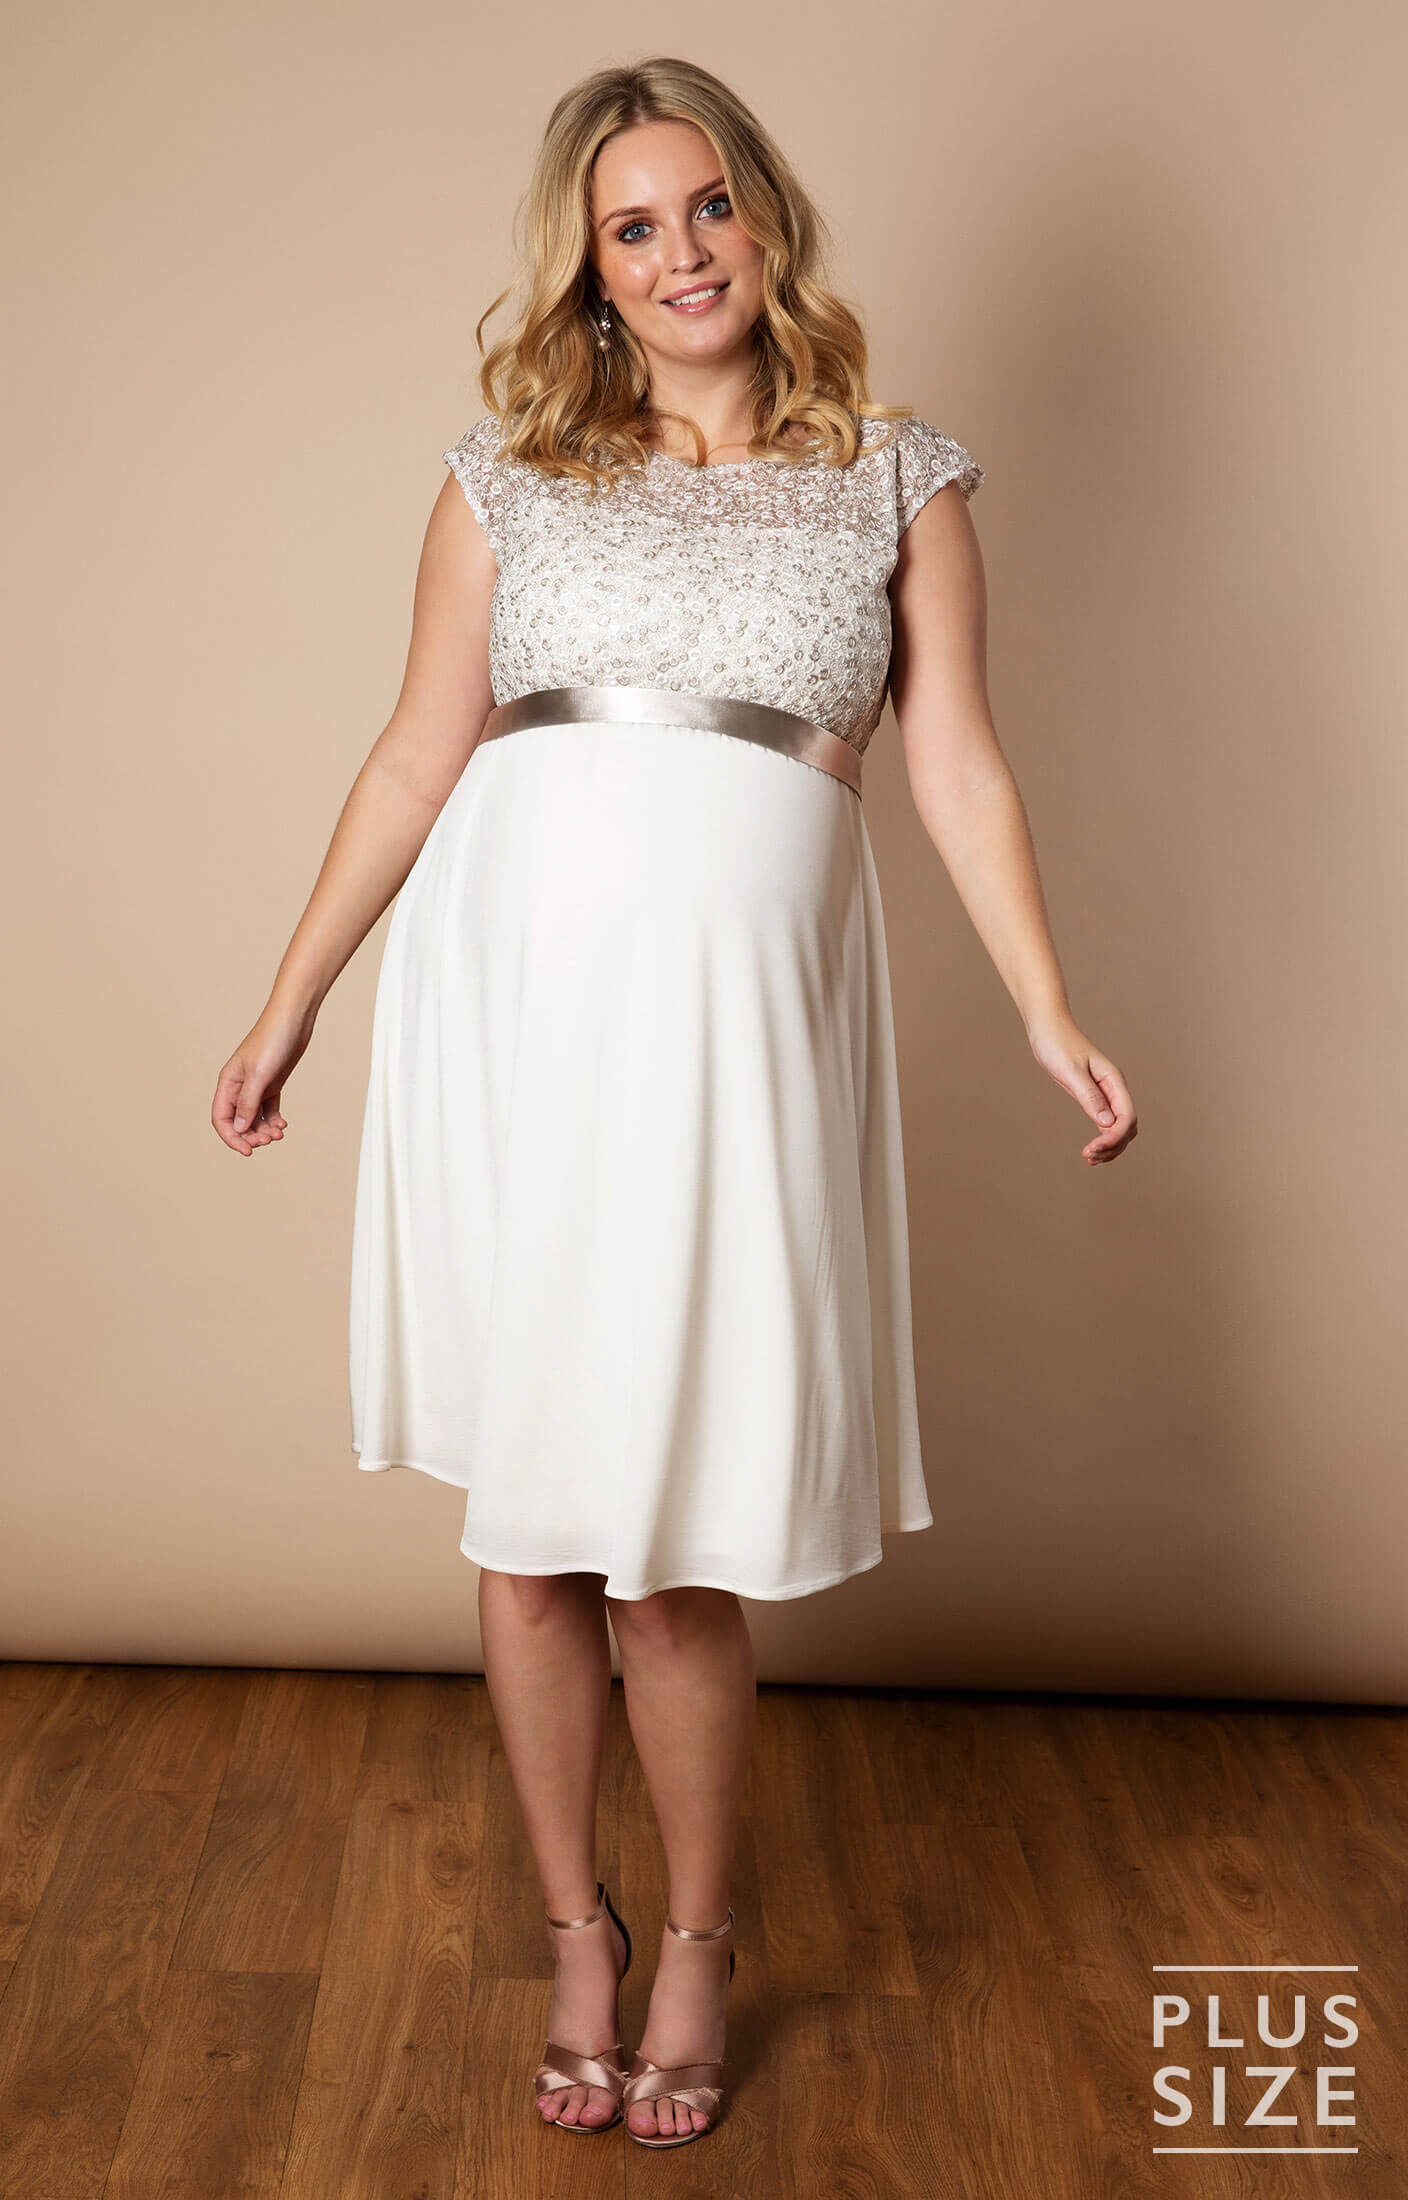 Mia Plus Size Maternity Dress Ivory Maternity Wedding Dresses Evening Wear And Party Clothes